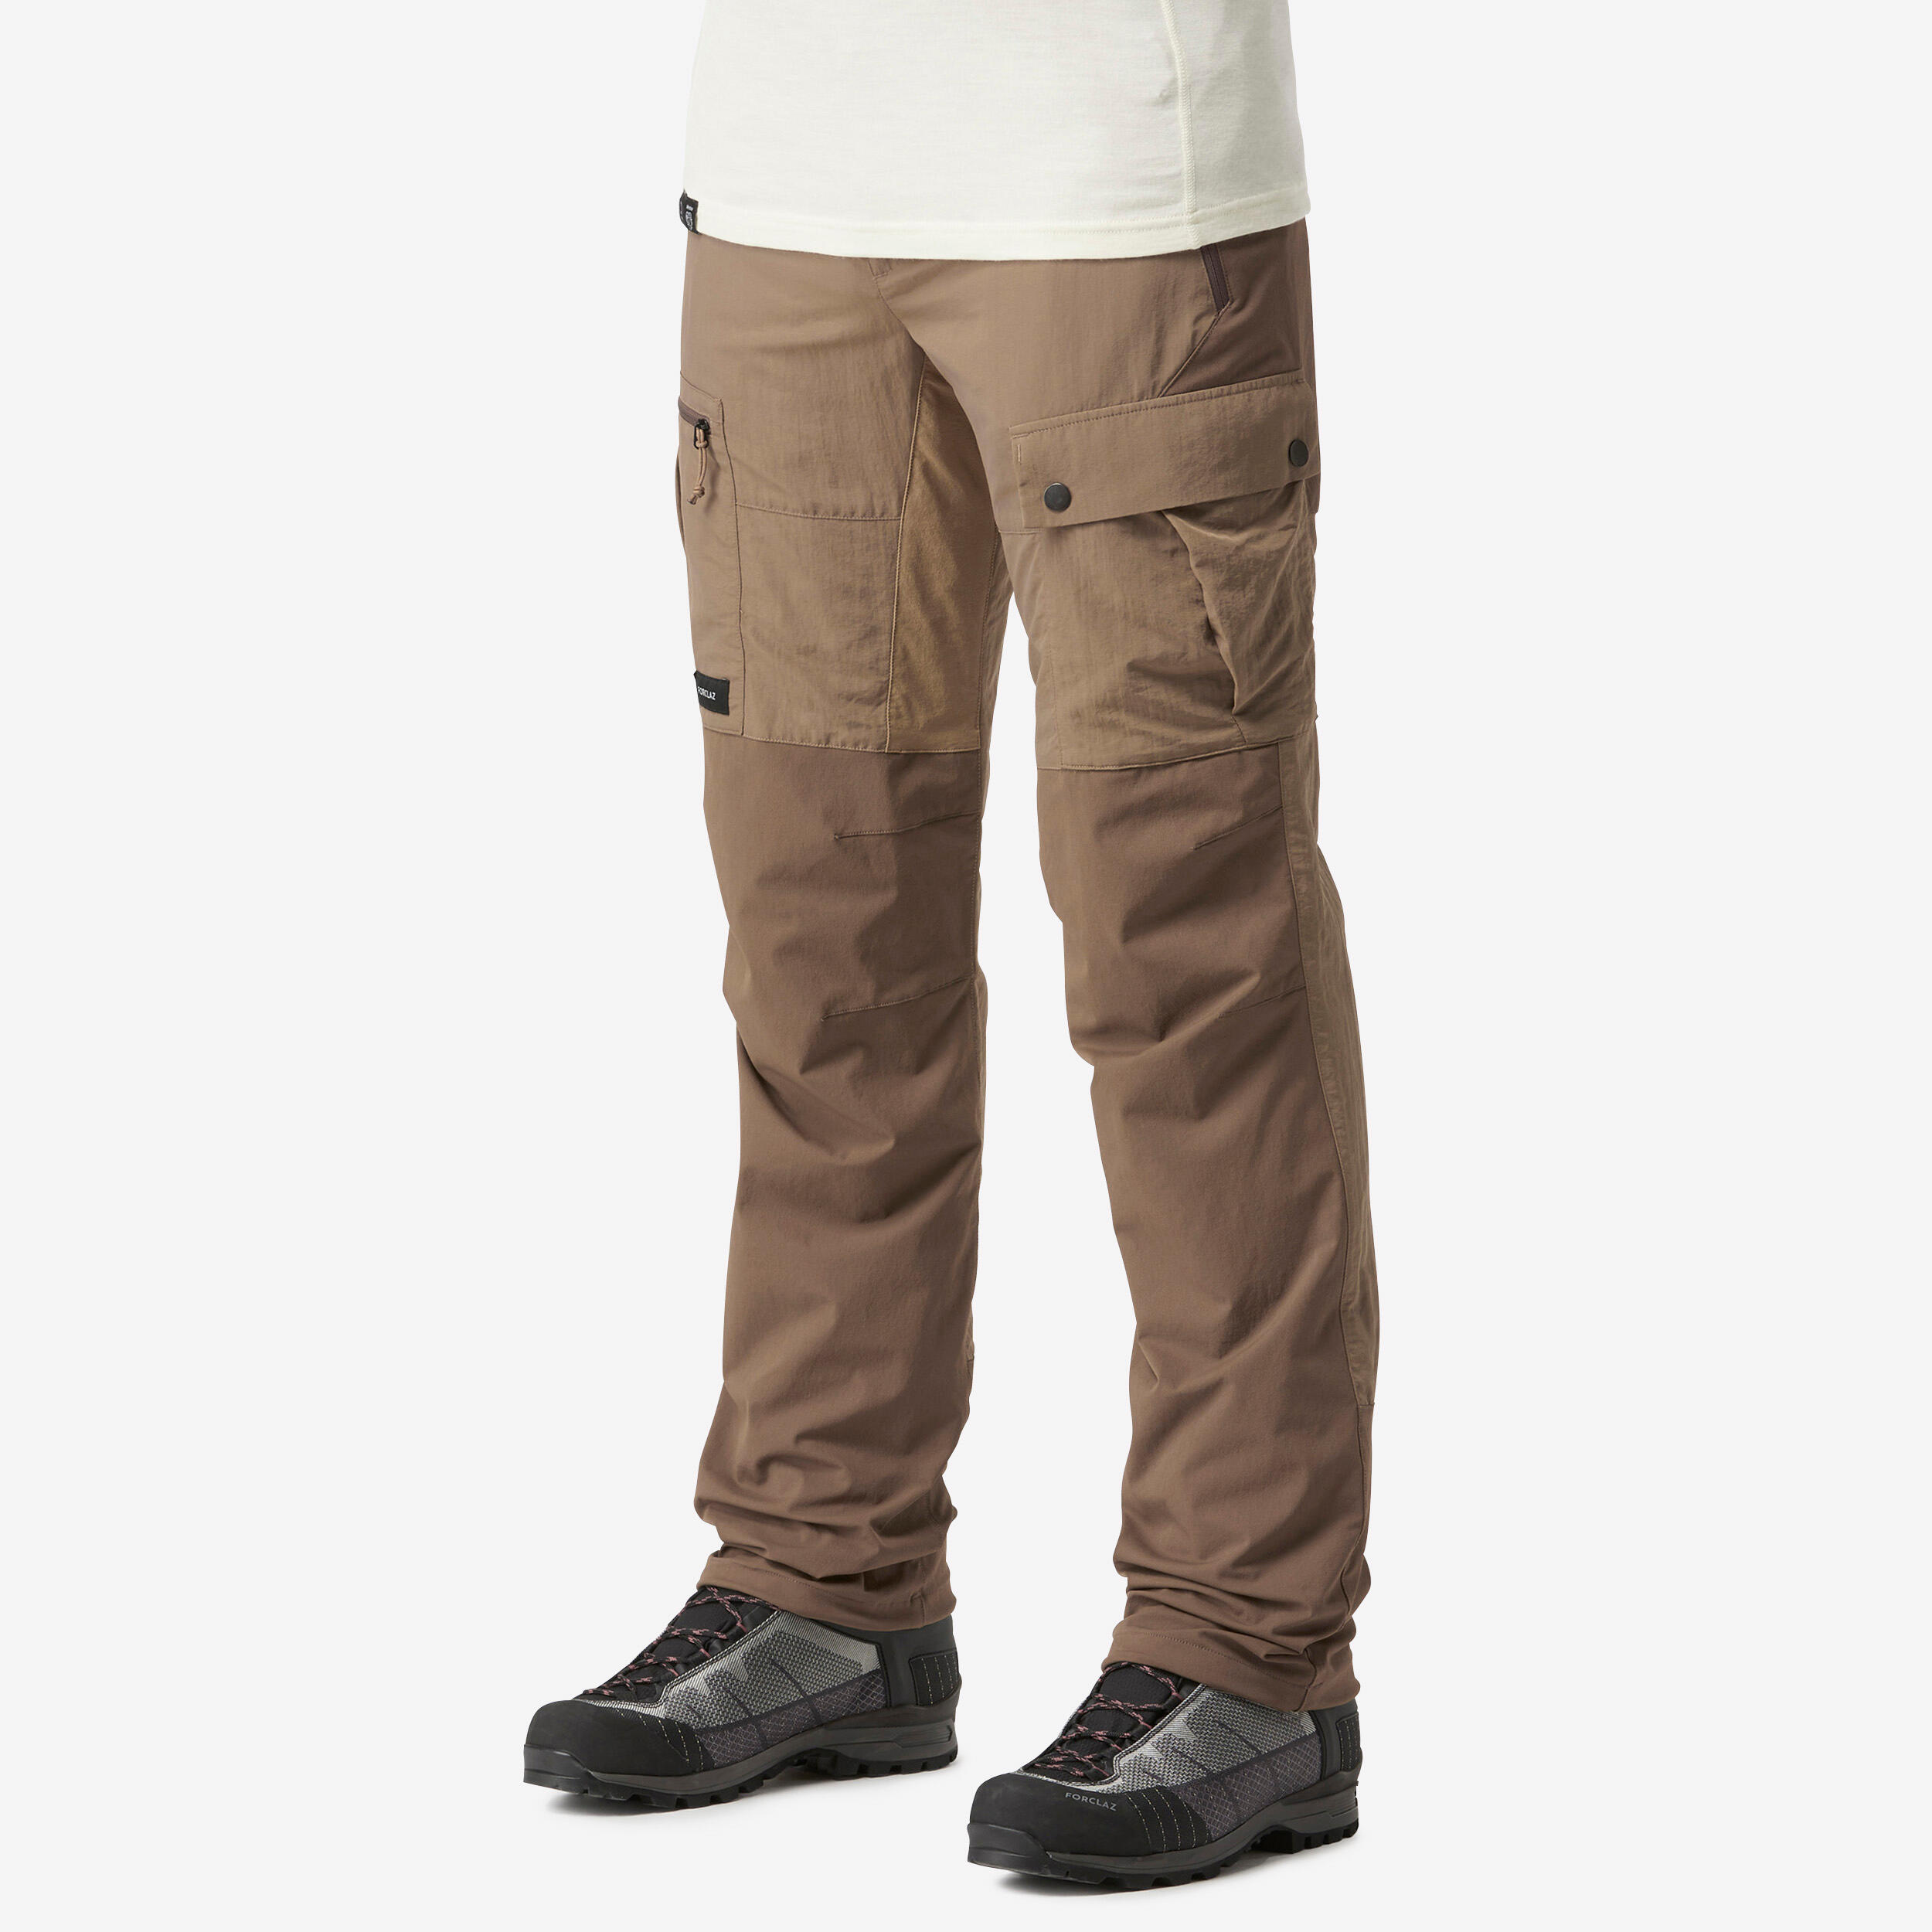 Quechua Decathlon Hiking Warm Water-repellent Trousers - Sh100 in Black |  Lyst UK